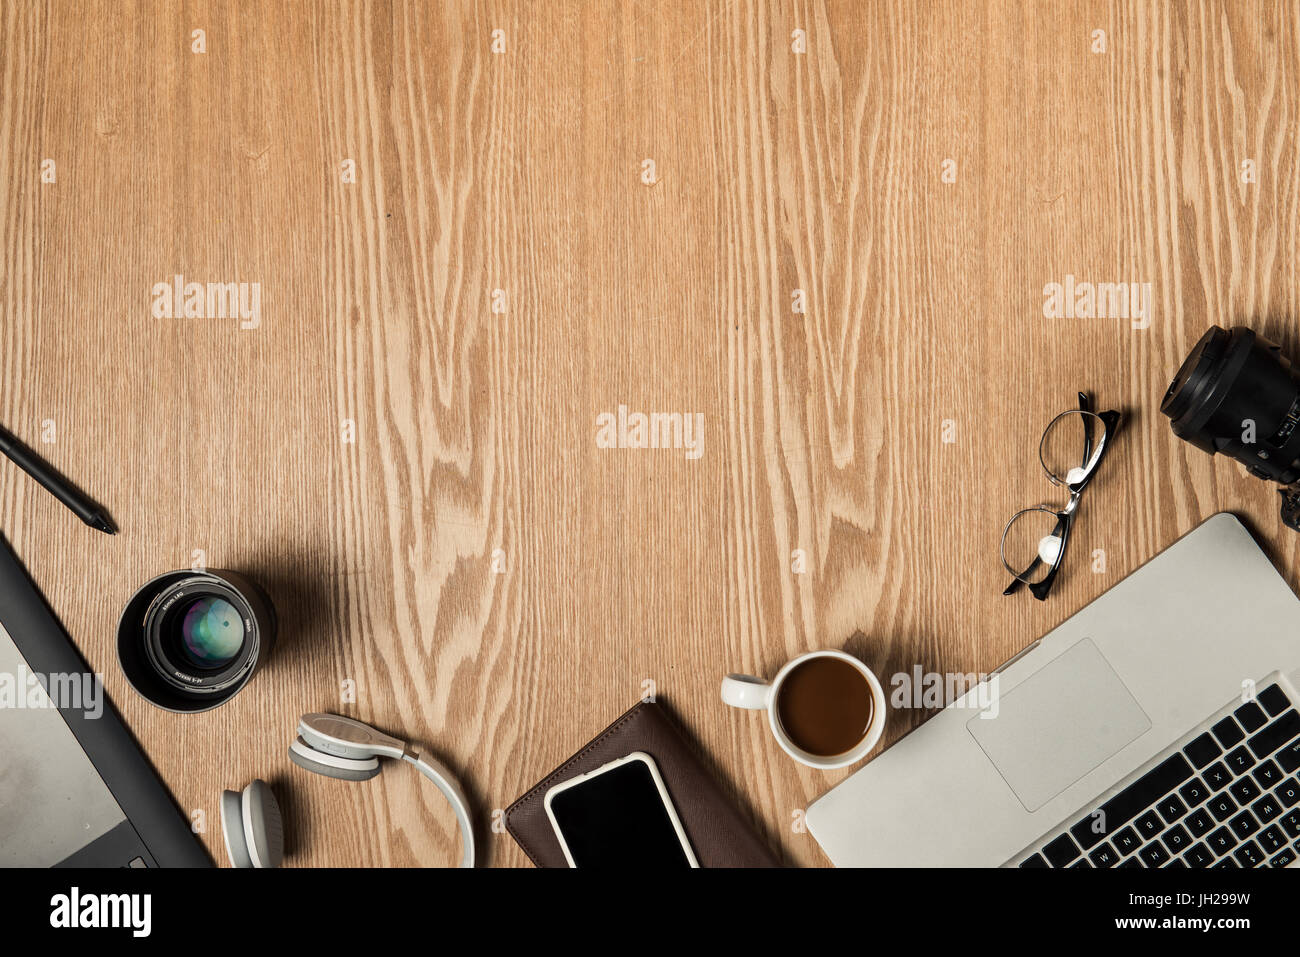 Work space for photographer, graphic designer. Flat lay of laptop, camera, colorchart, digital tablet, coffee cup, book, pencil on wooden table. Stock Photo